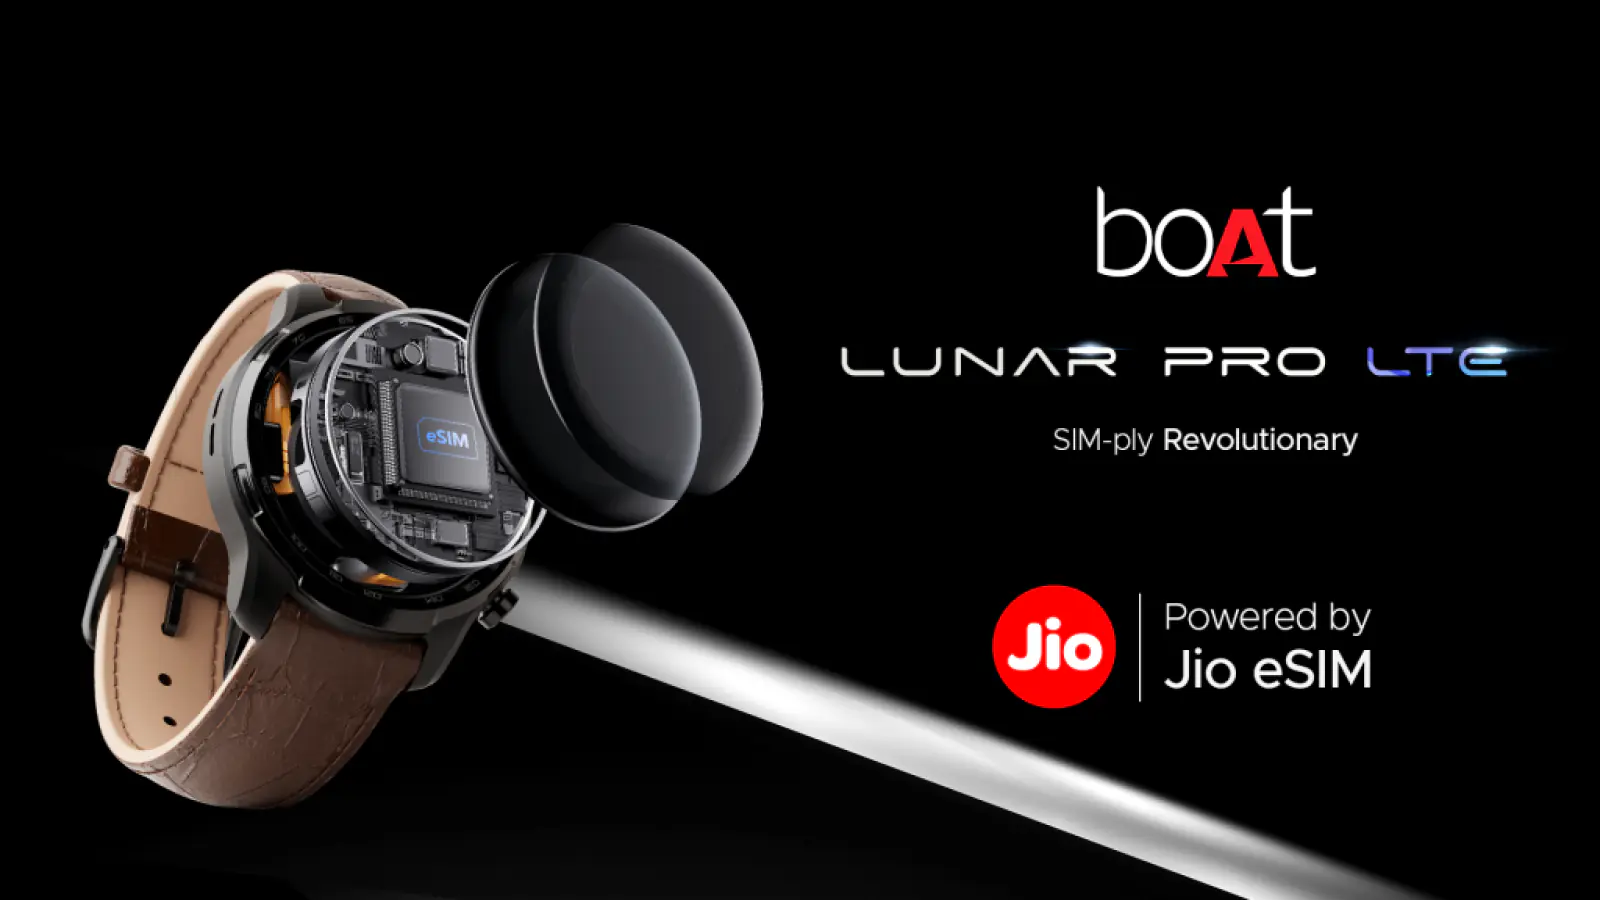 boAt Lunar Pro LTE smartwatch launched in India with Jio eSIM support, know price and features